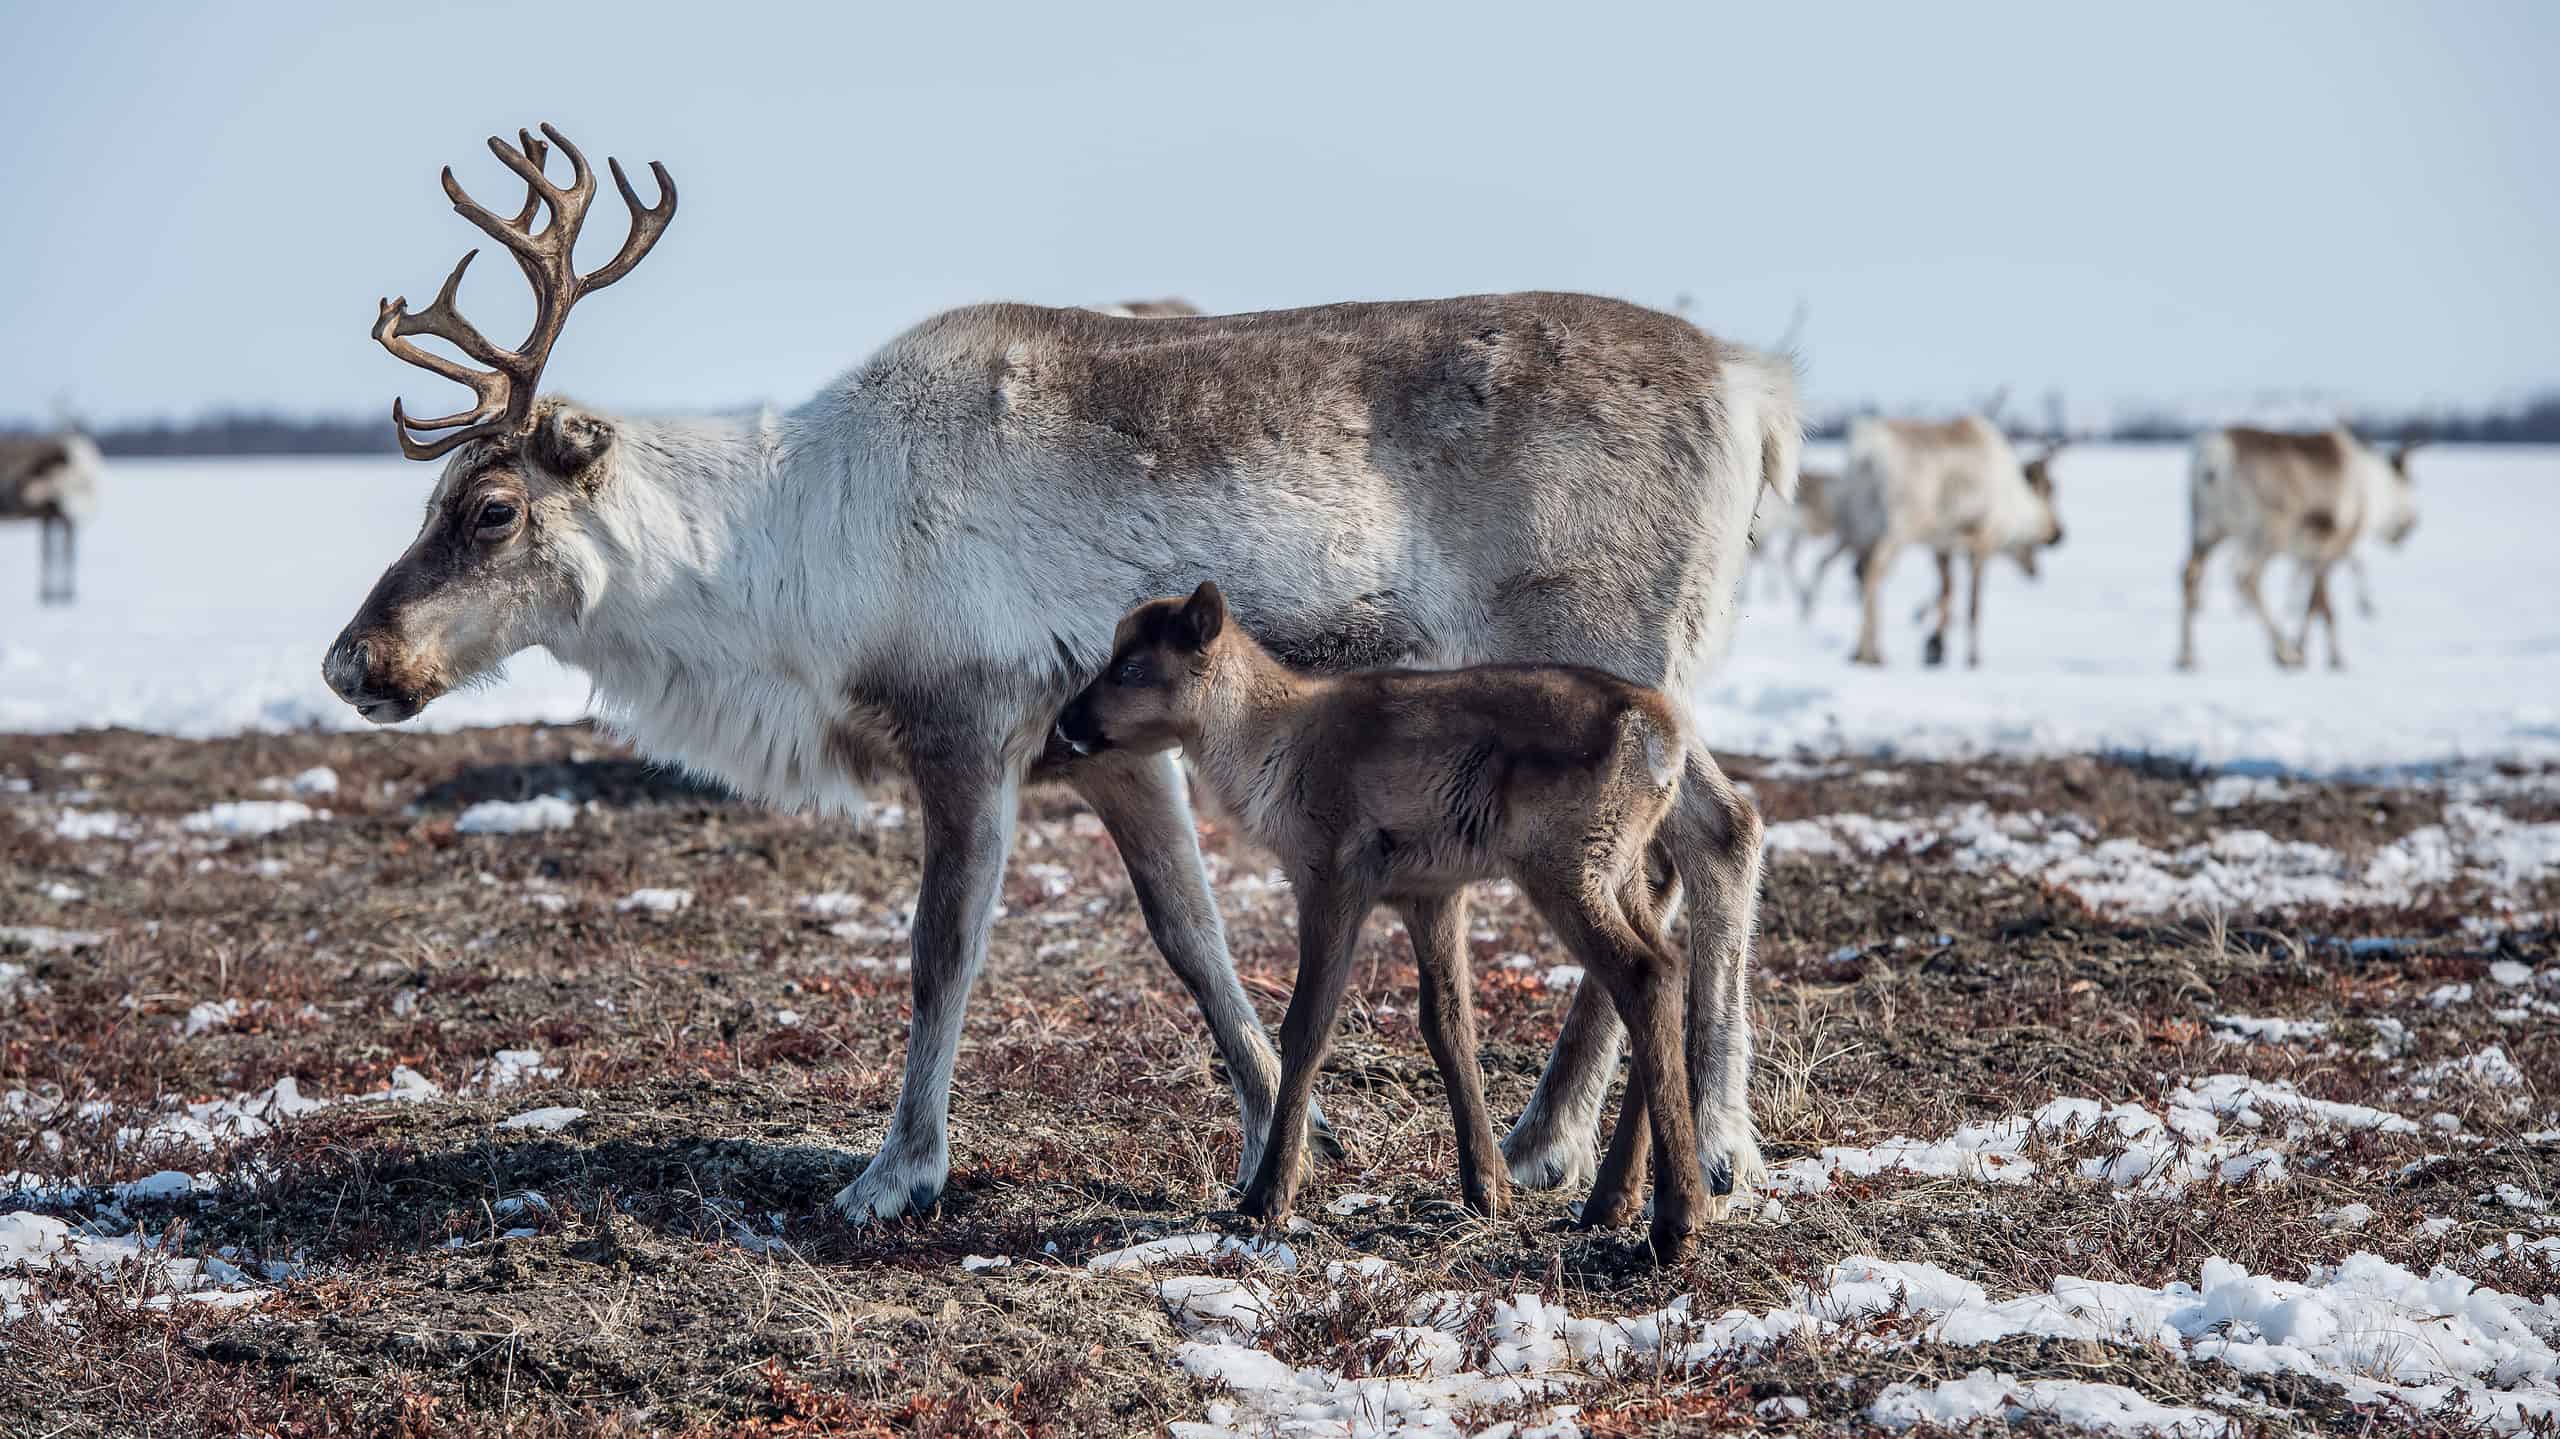 Female reindeer with offspring